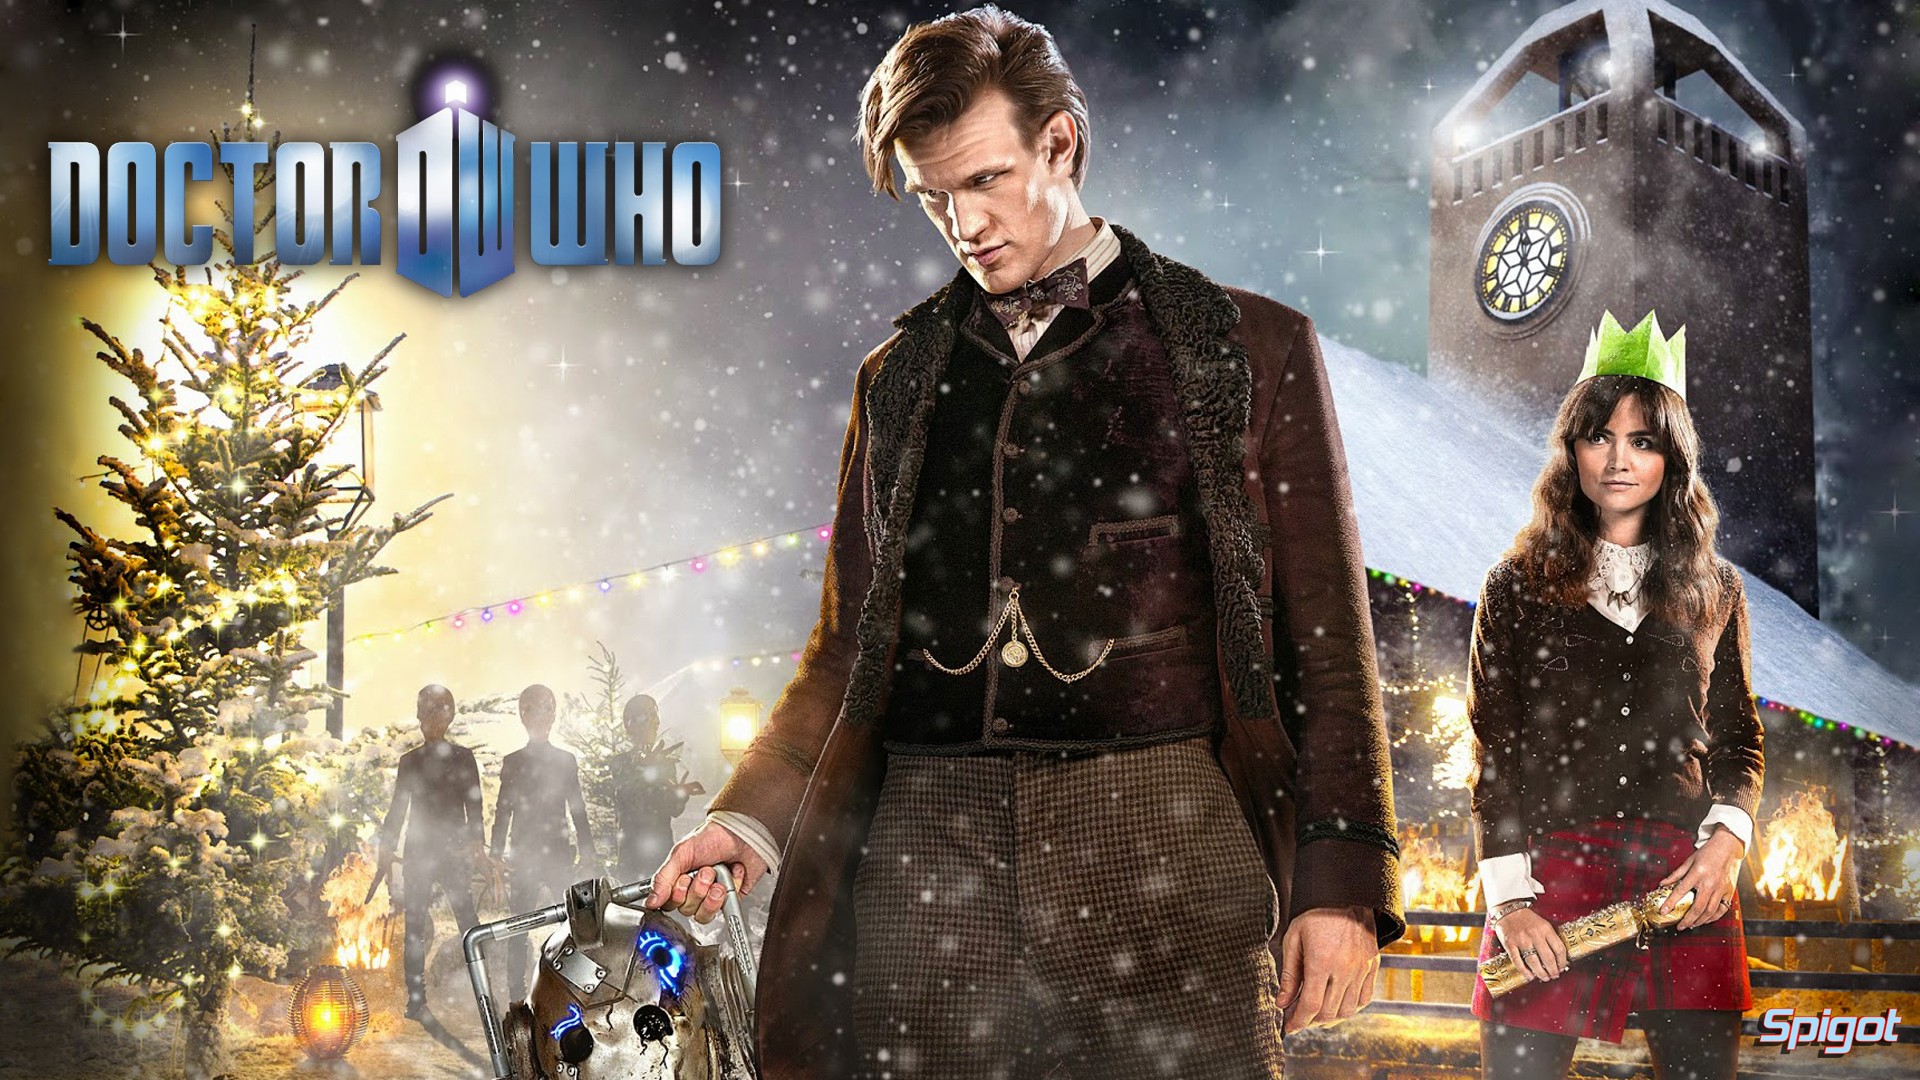 The Doctor Doctor Who Matt Smith Clara Oswald Eleventh Doctor Jenna Louise Coleman 1920x1080